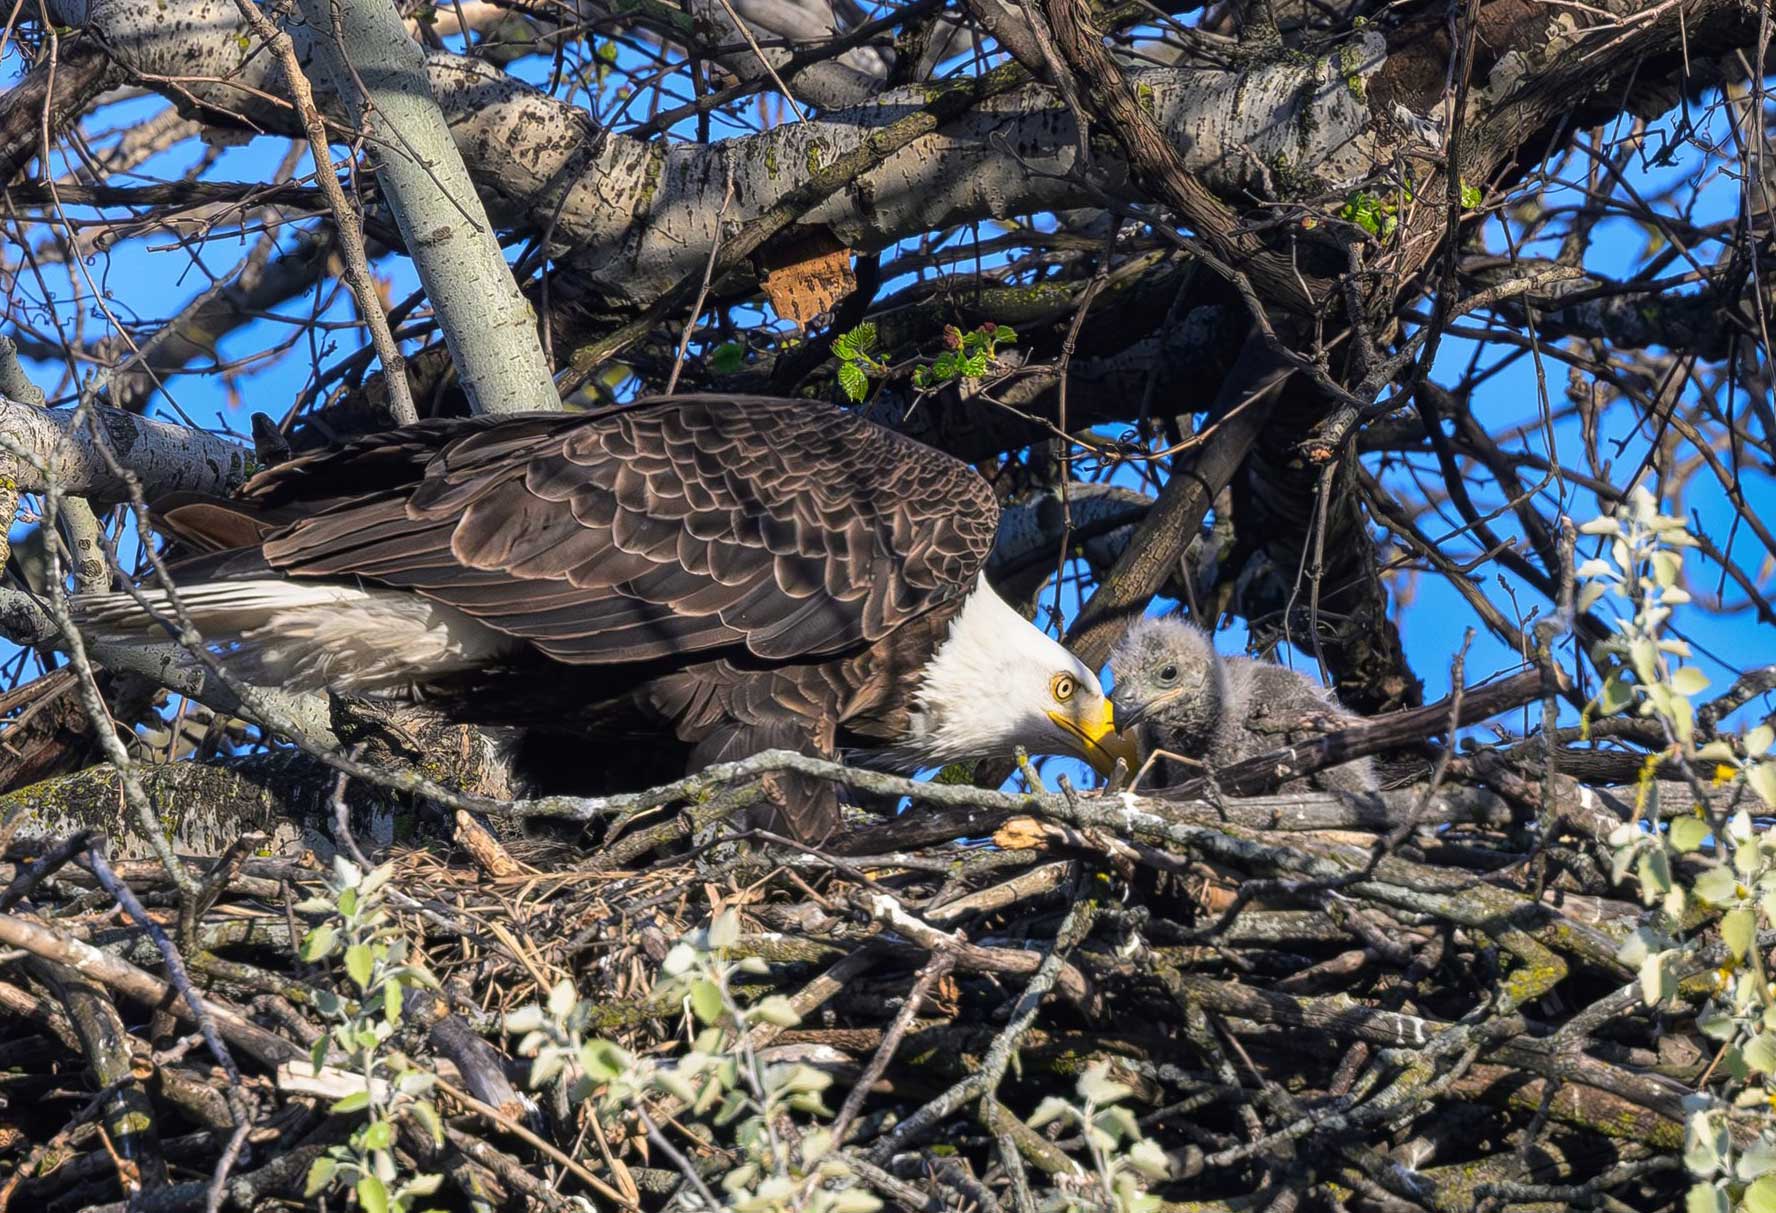 A bald eagle and its eaglet in a nest.